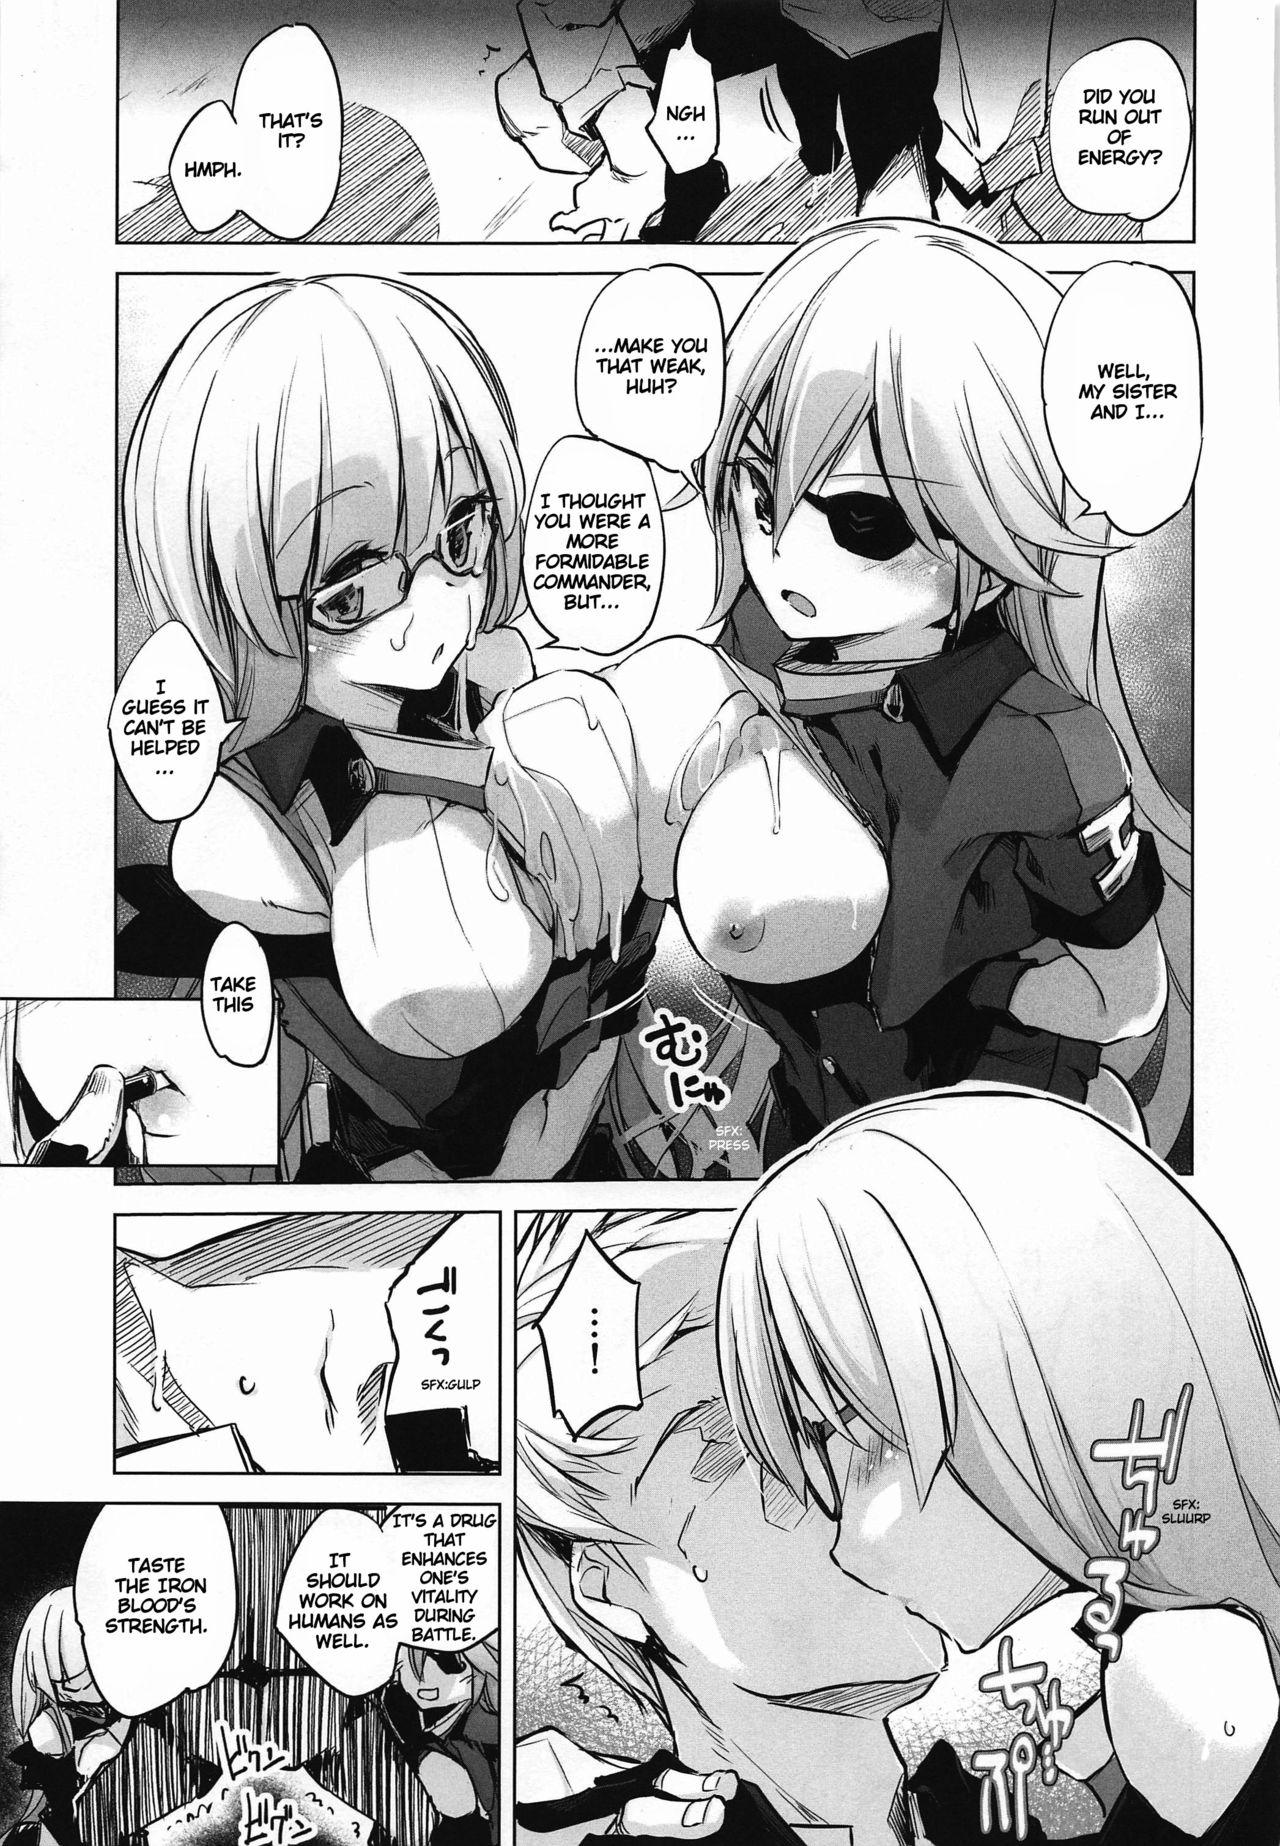 Freckles Insufficient main force to shoot ! Iron-Blood Battleship and Battle Cruiser Summary Book - Azur lane Black - Page 8